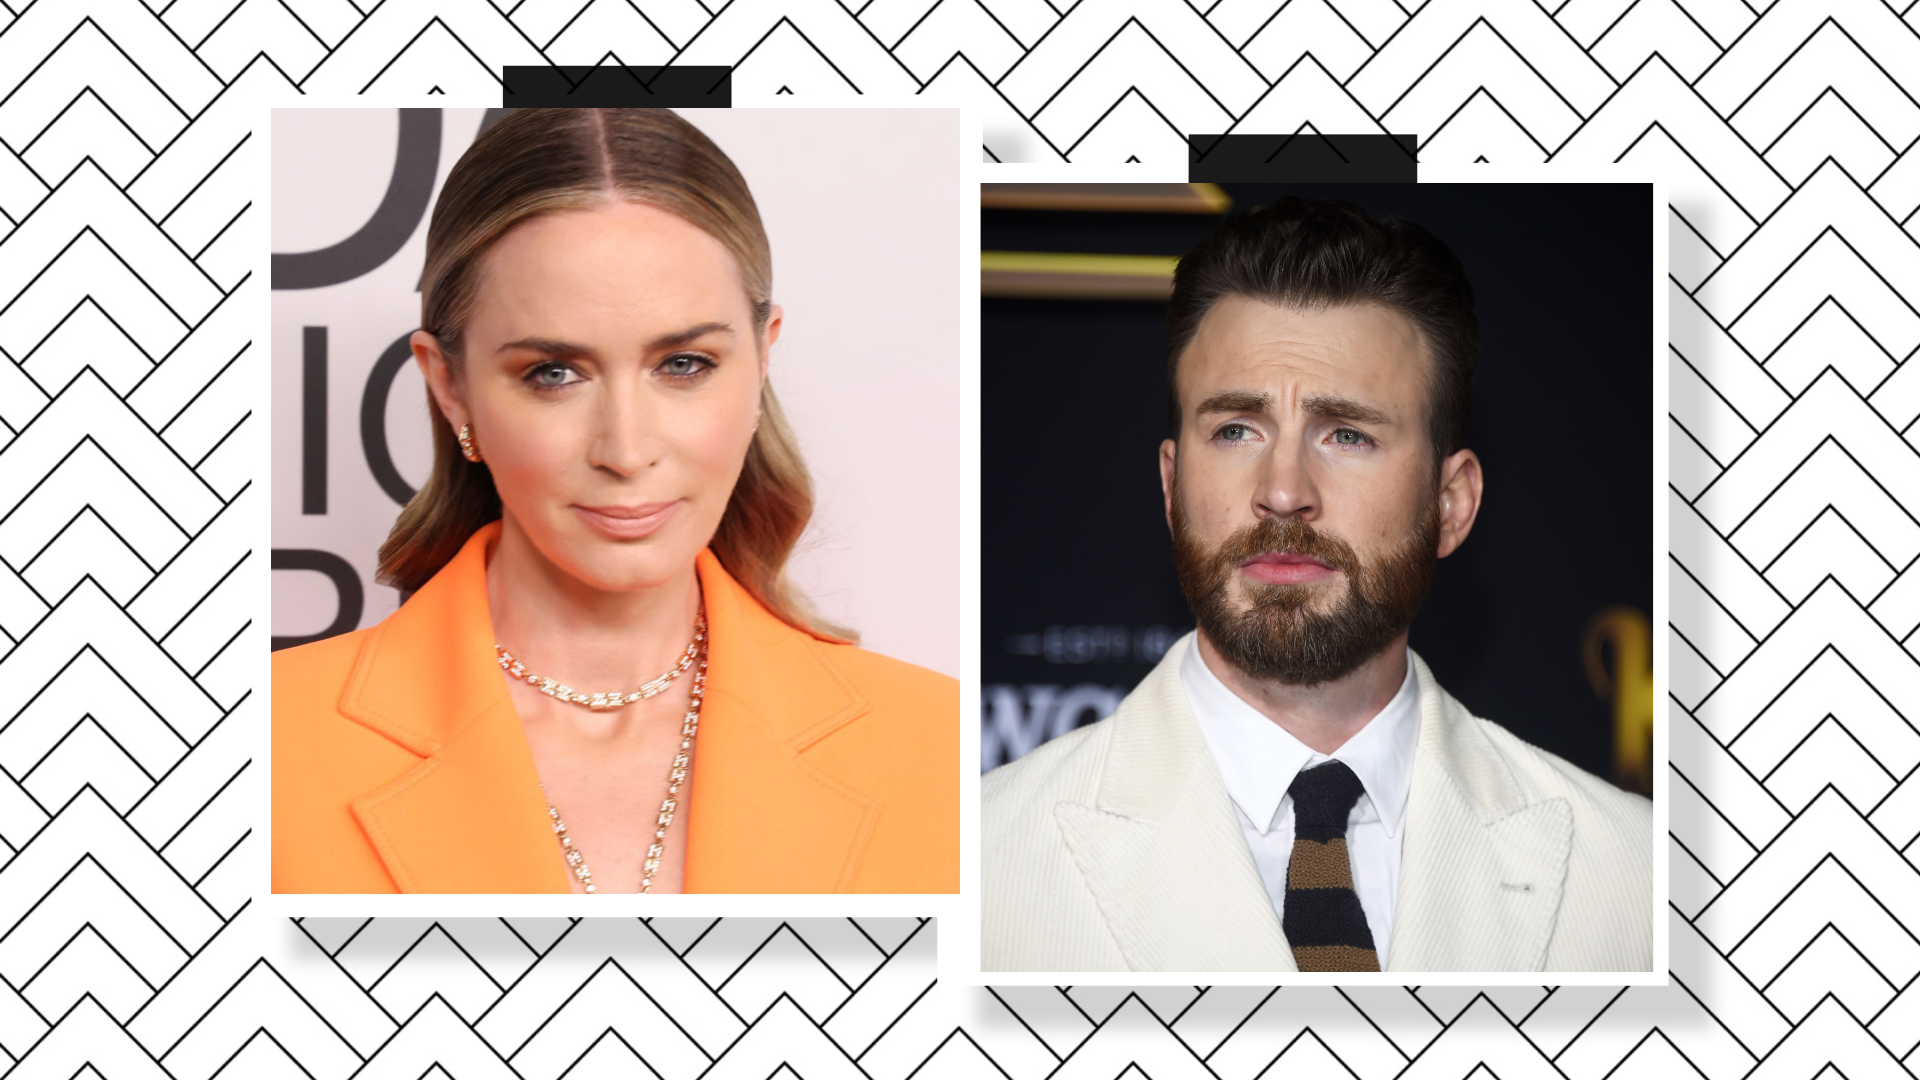 Pain Hustlers' Cast Guide: Chris Evans and Emily Blunt Star in